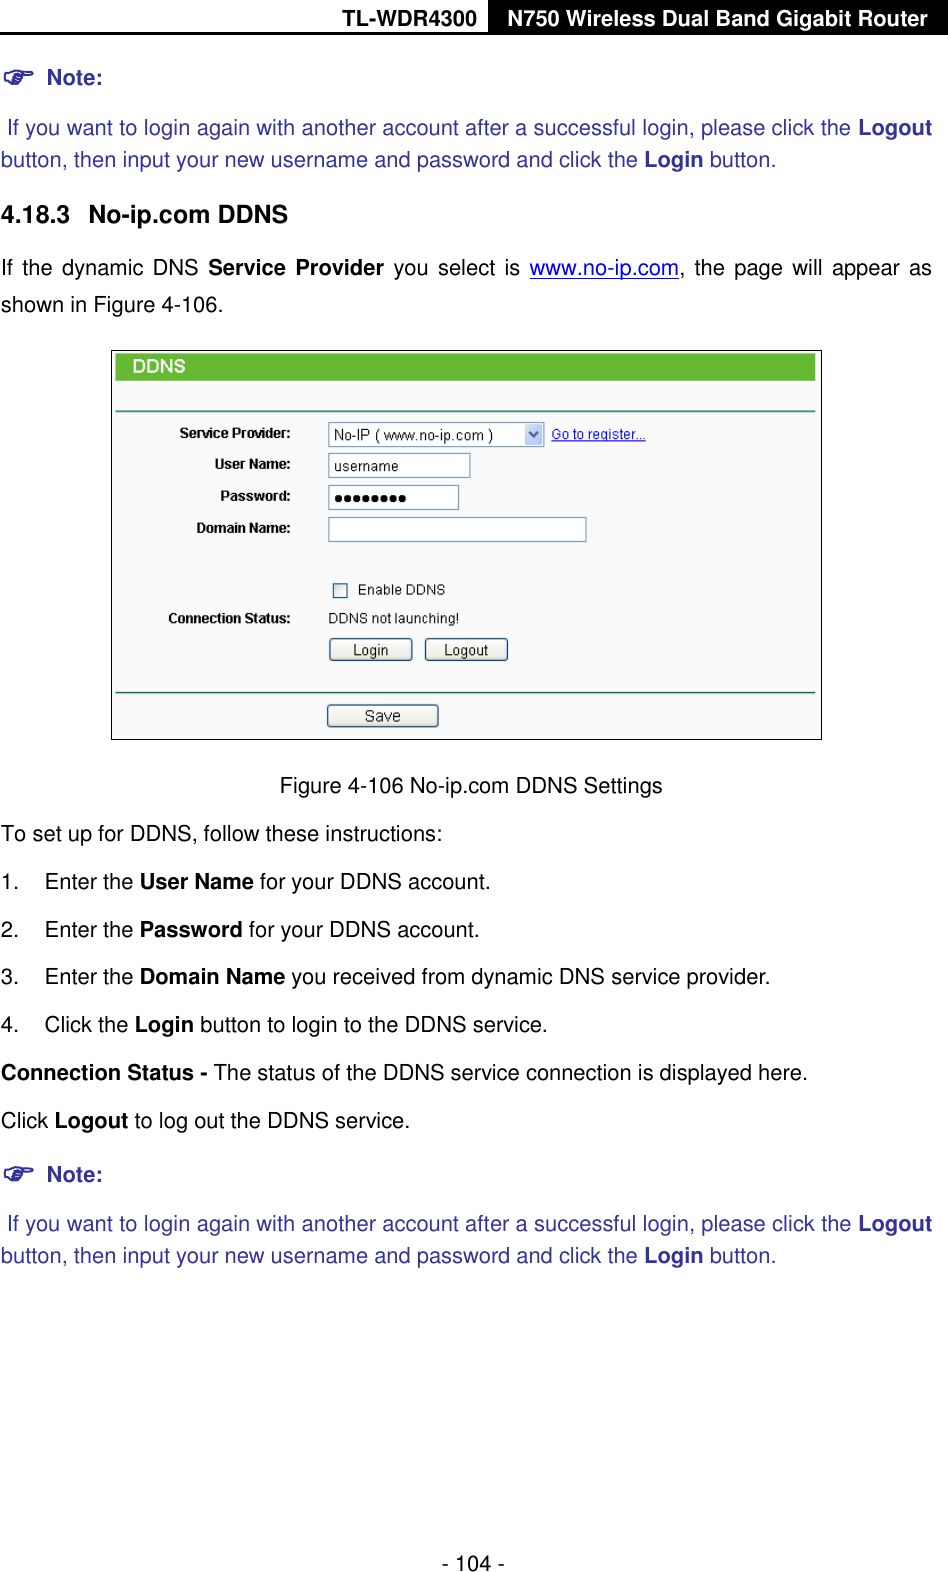 TL-WDR4300 N750 Wireless Dual Band Gigabit Router  - 104 -  Note:  If you want to login again with another account after a successful login, please click the Logout button, then input your new username and password and click the Login button. 4.18.3  No-ip.com DDNS If the dynamic DNS Service Provider you select is  www.no-ip.com, the page will appear as shown in Figure 4-106.  Figure 4-106 No-ip.com DDNS Settings To set up for DDNS, follow these instructions: 1.  Enter the User Name for your DDNS account.   2.  Enter the Password for your DDNS account.   3.  Enter the Domain Name you received from dynamic DNS service provider.   4.  Click the Login button to login to the DDNS service.   Connection Status - The status of the DDNS service connection is displayed here. Click Logout to log out the DDNS service.  Note:  If you want to login again with another account after a successful login, please click the Logout button, then input your new username and password and click the Login button. 